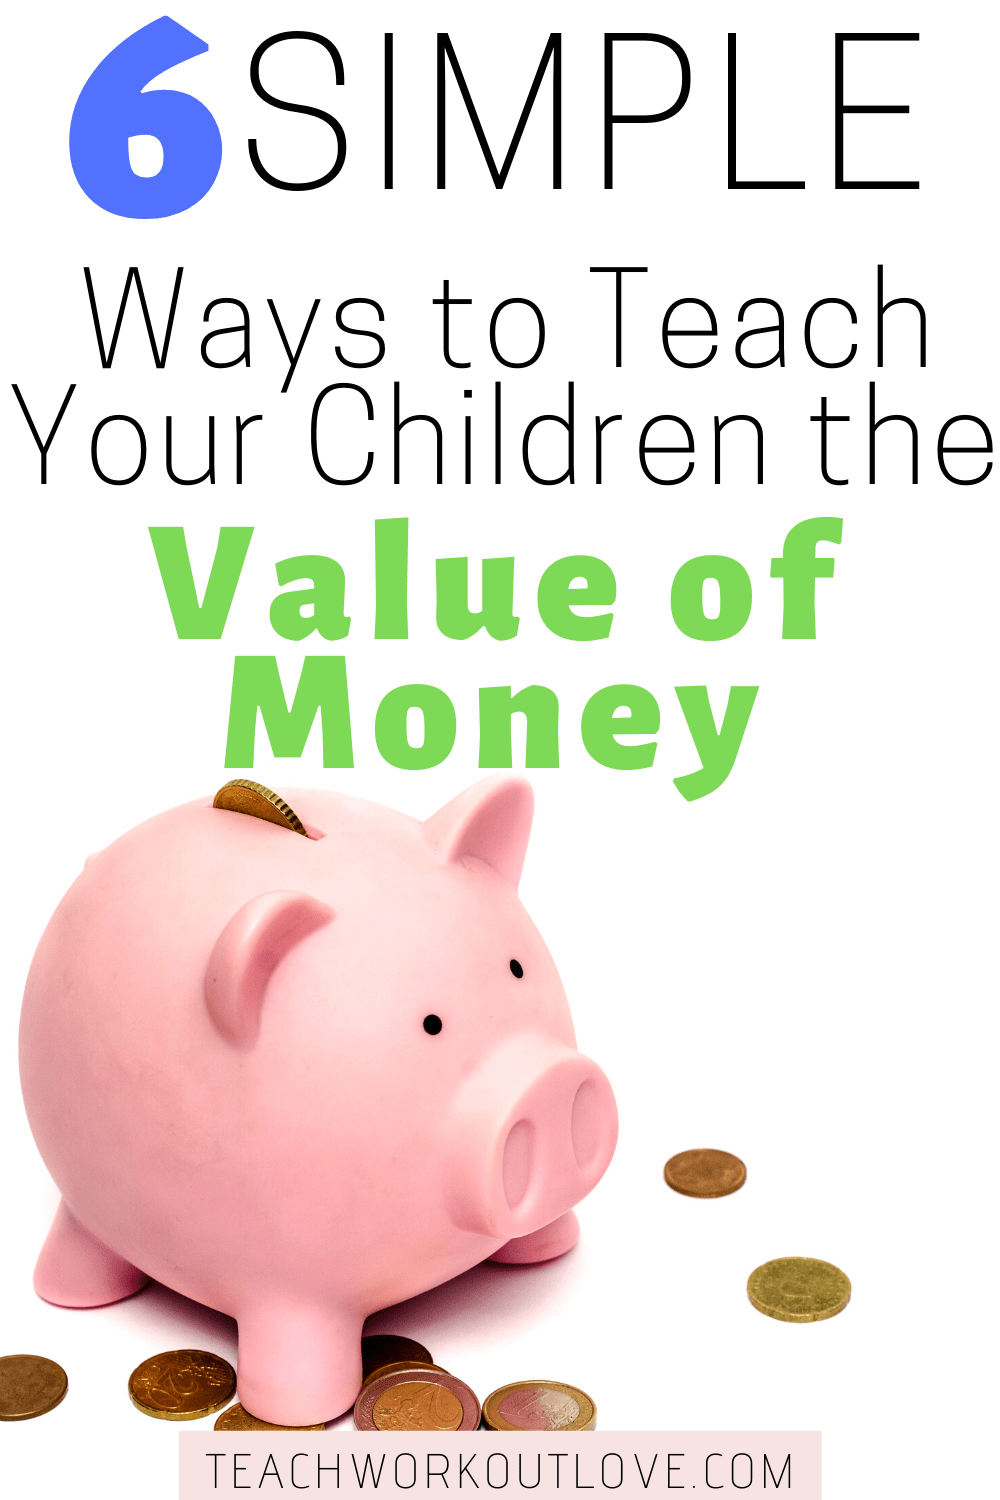 It's important to teach the value of money to children from a young age. But how will you do so? Find the best possible 6 ways in the content below!